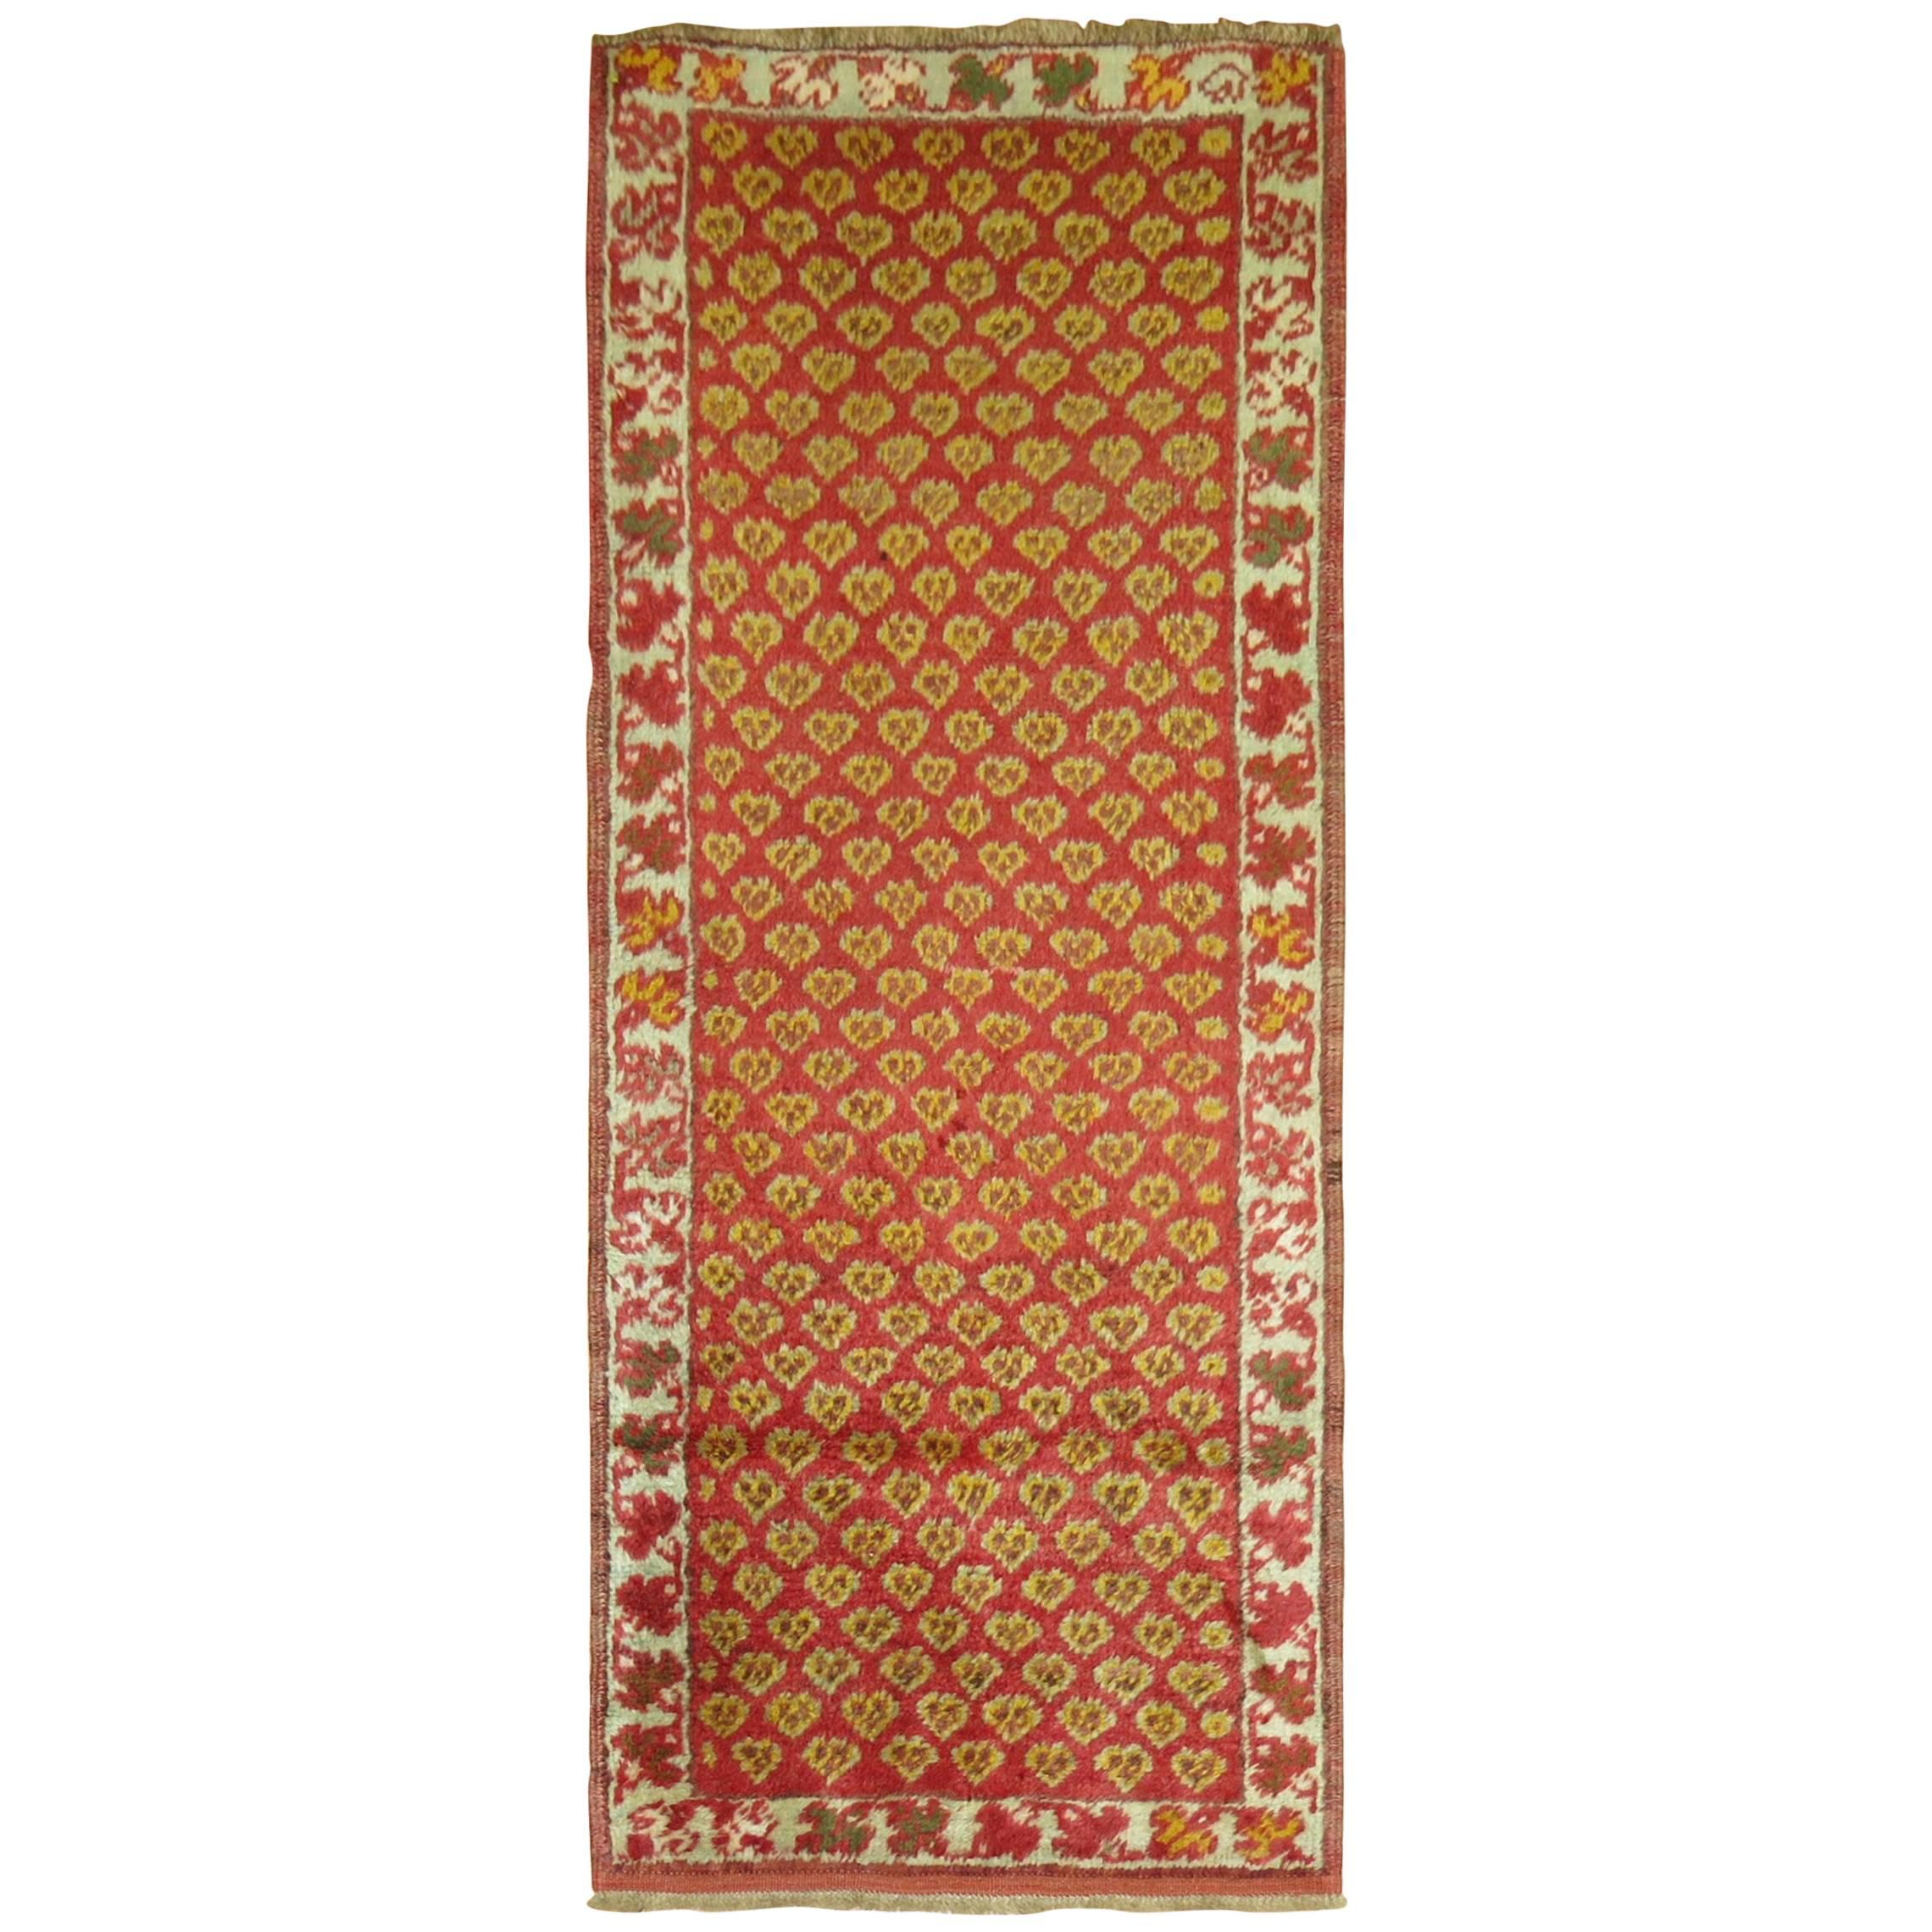 Red Small Size Antique Turkish Rug